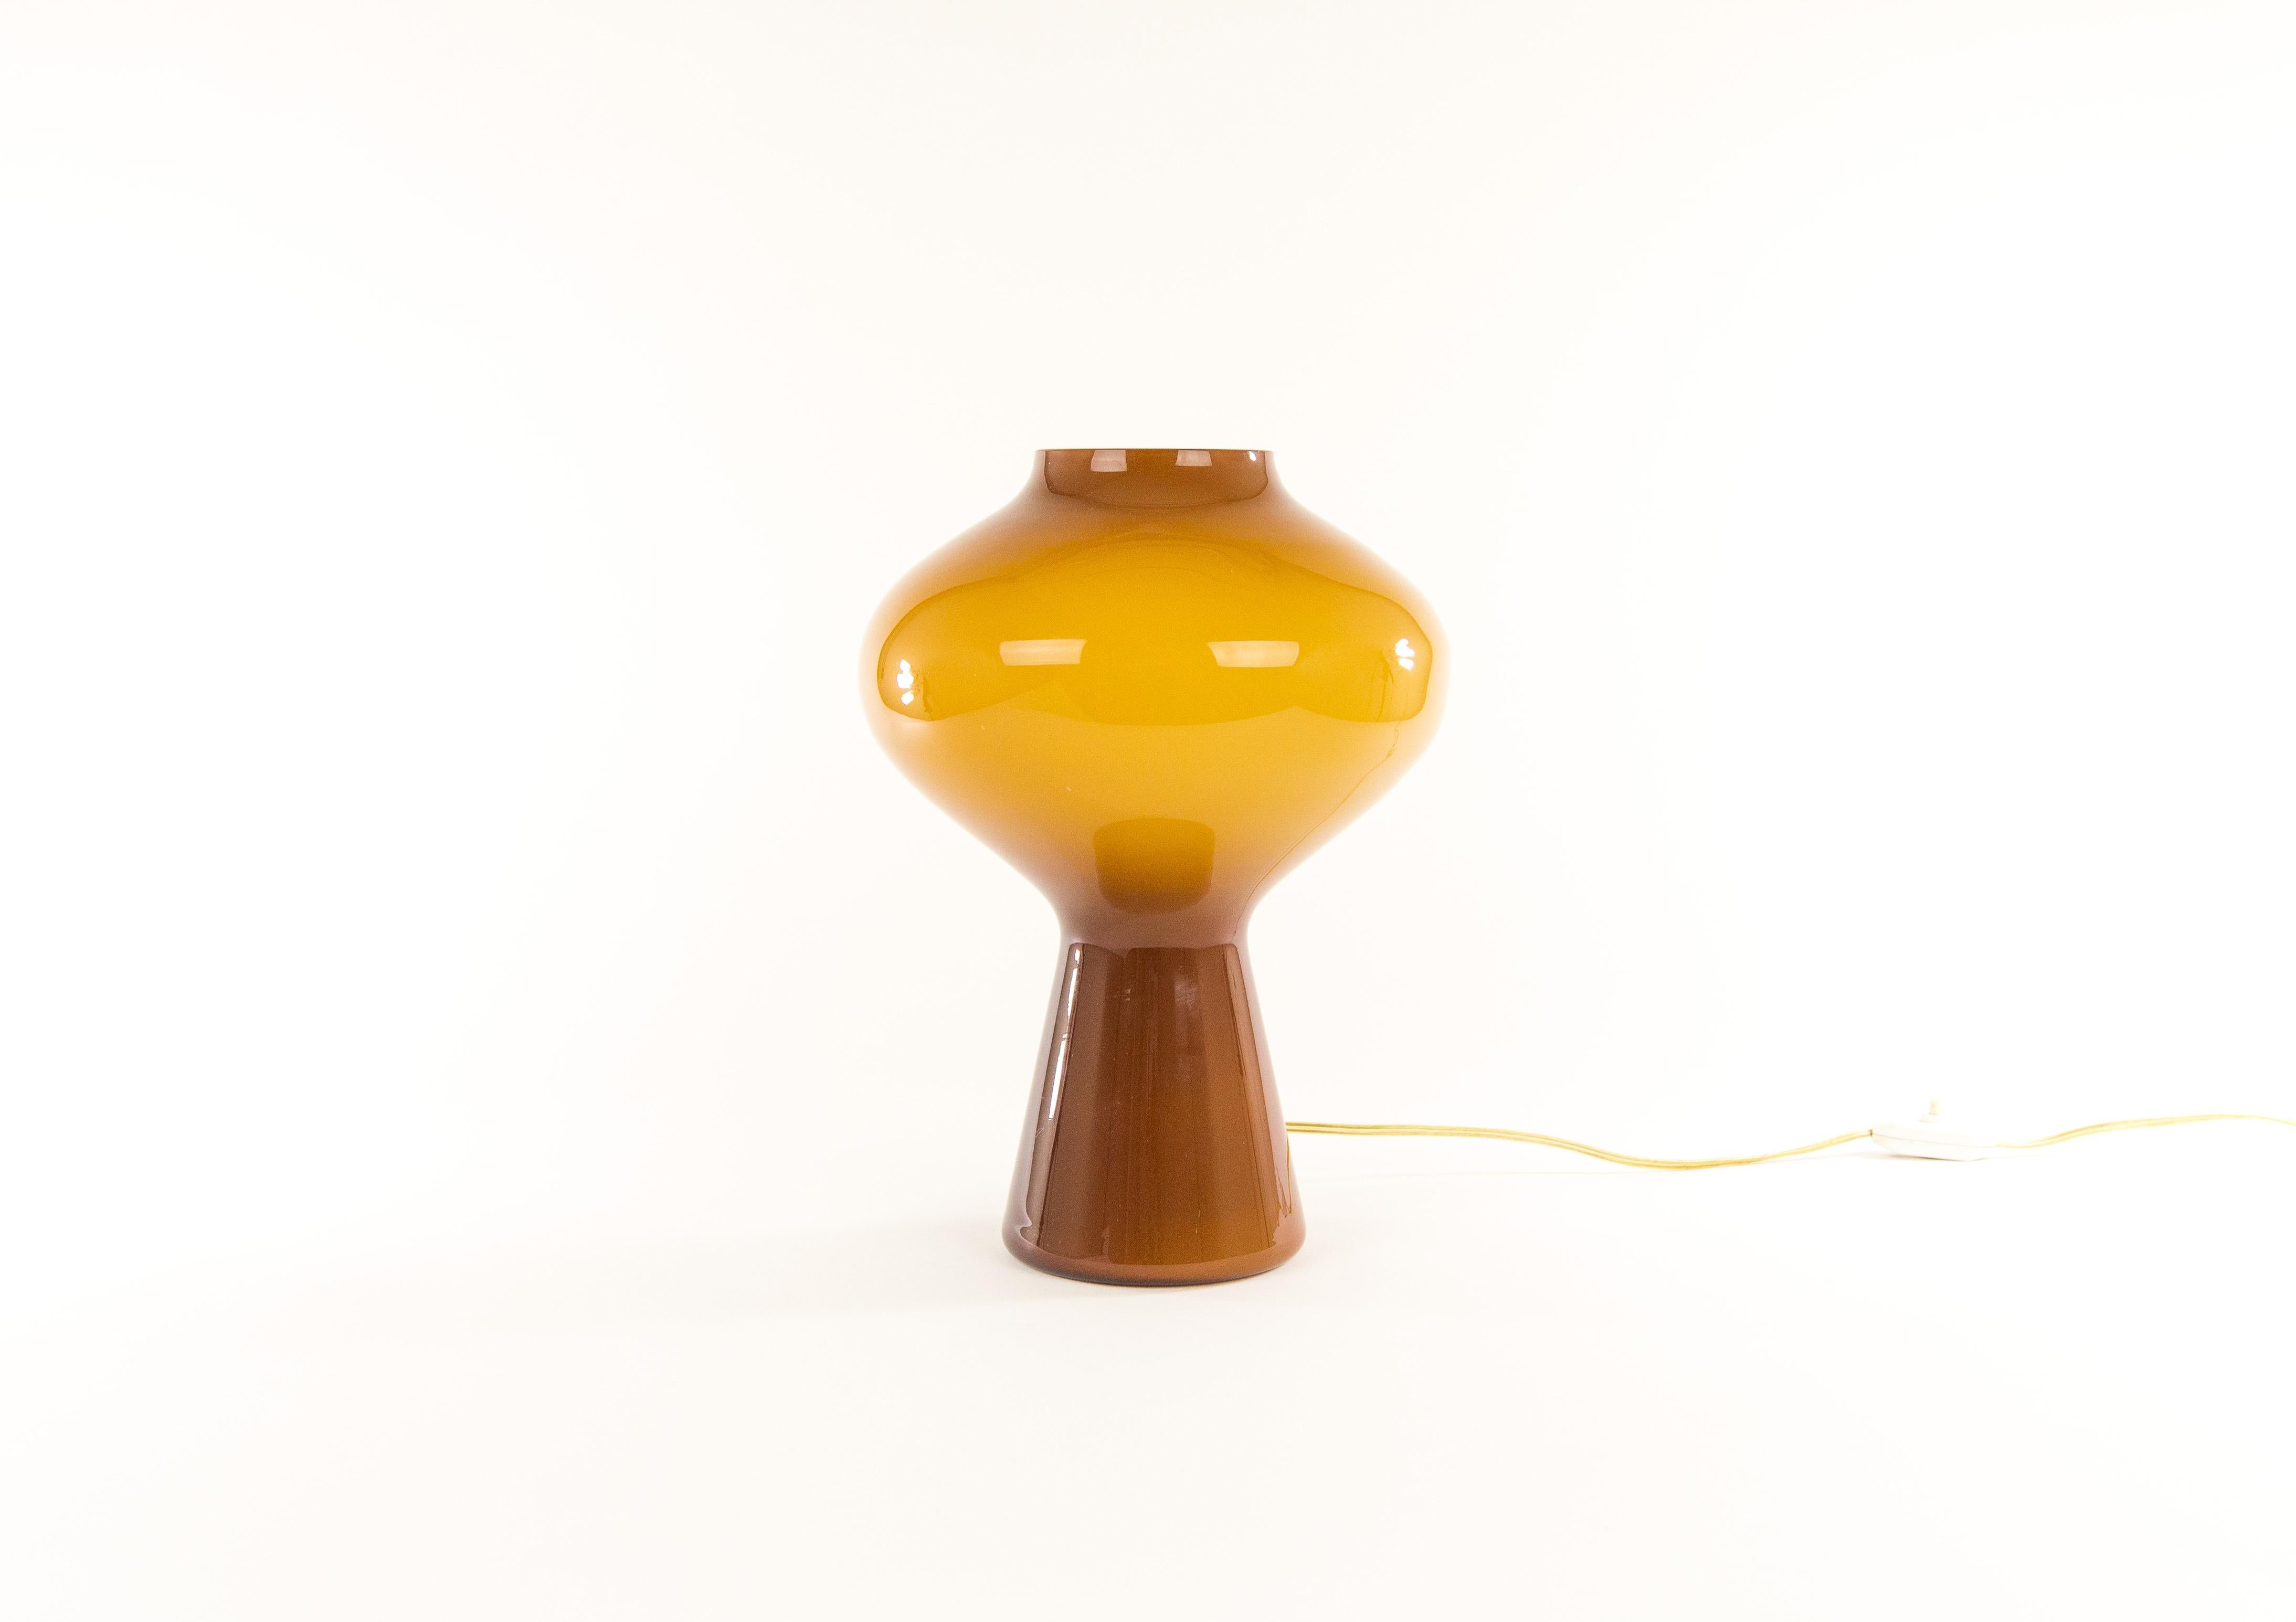 A hand blown amber colored glass Fungo table lamp designed by Massimo Vignelli at the start of his impressive career in design and executed by Murano glass specialist Venini.

These lamps were made in various sizes: this is the largest version. We